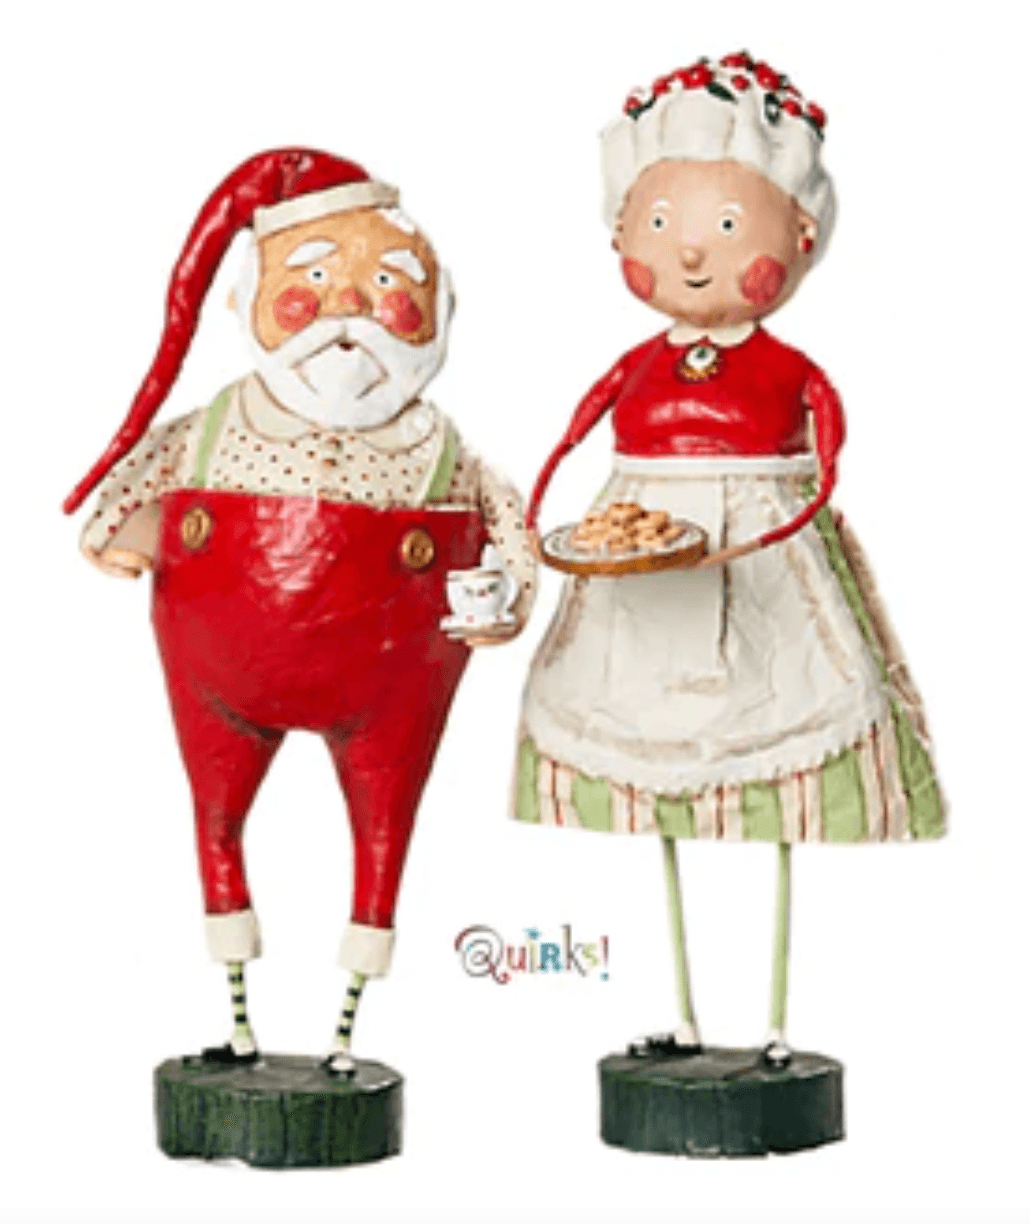 Lori Mitchell Christmas Collectible Figurines - Quirks!